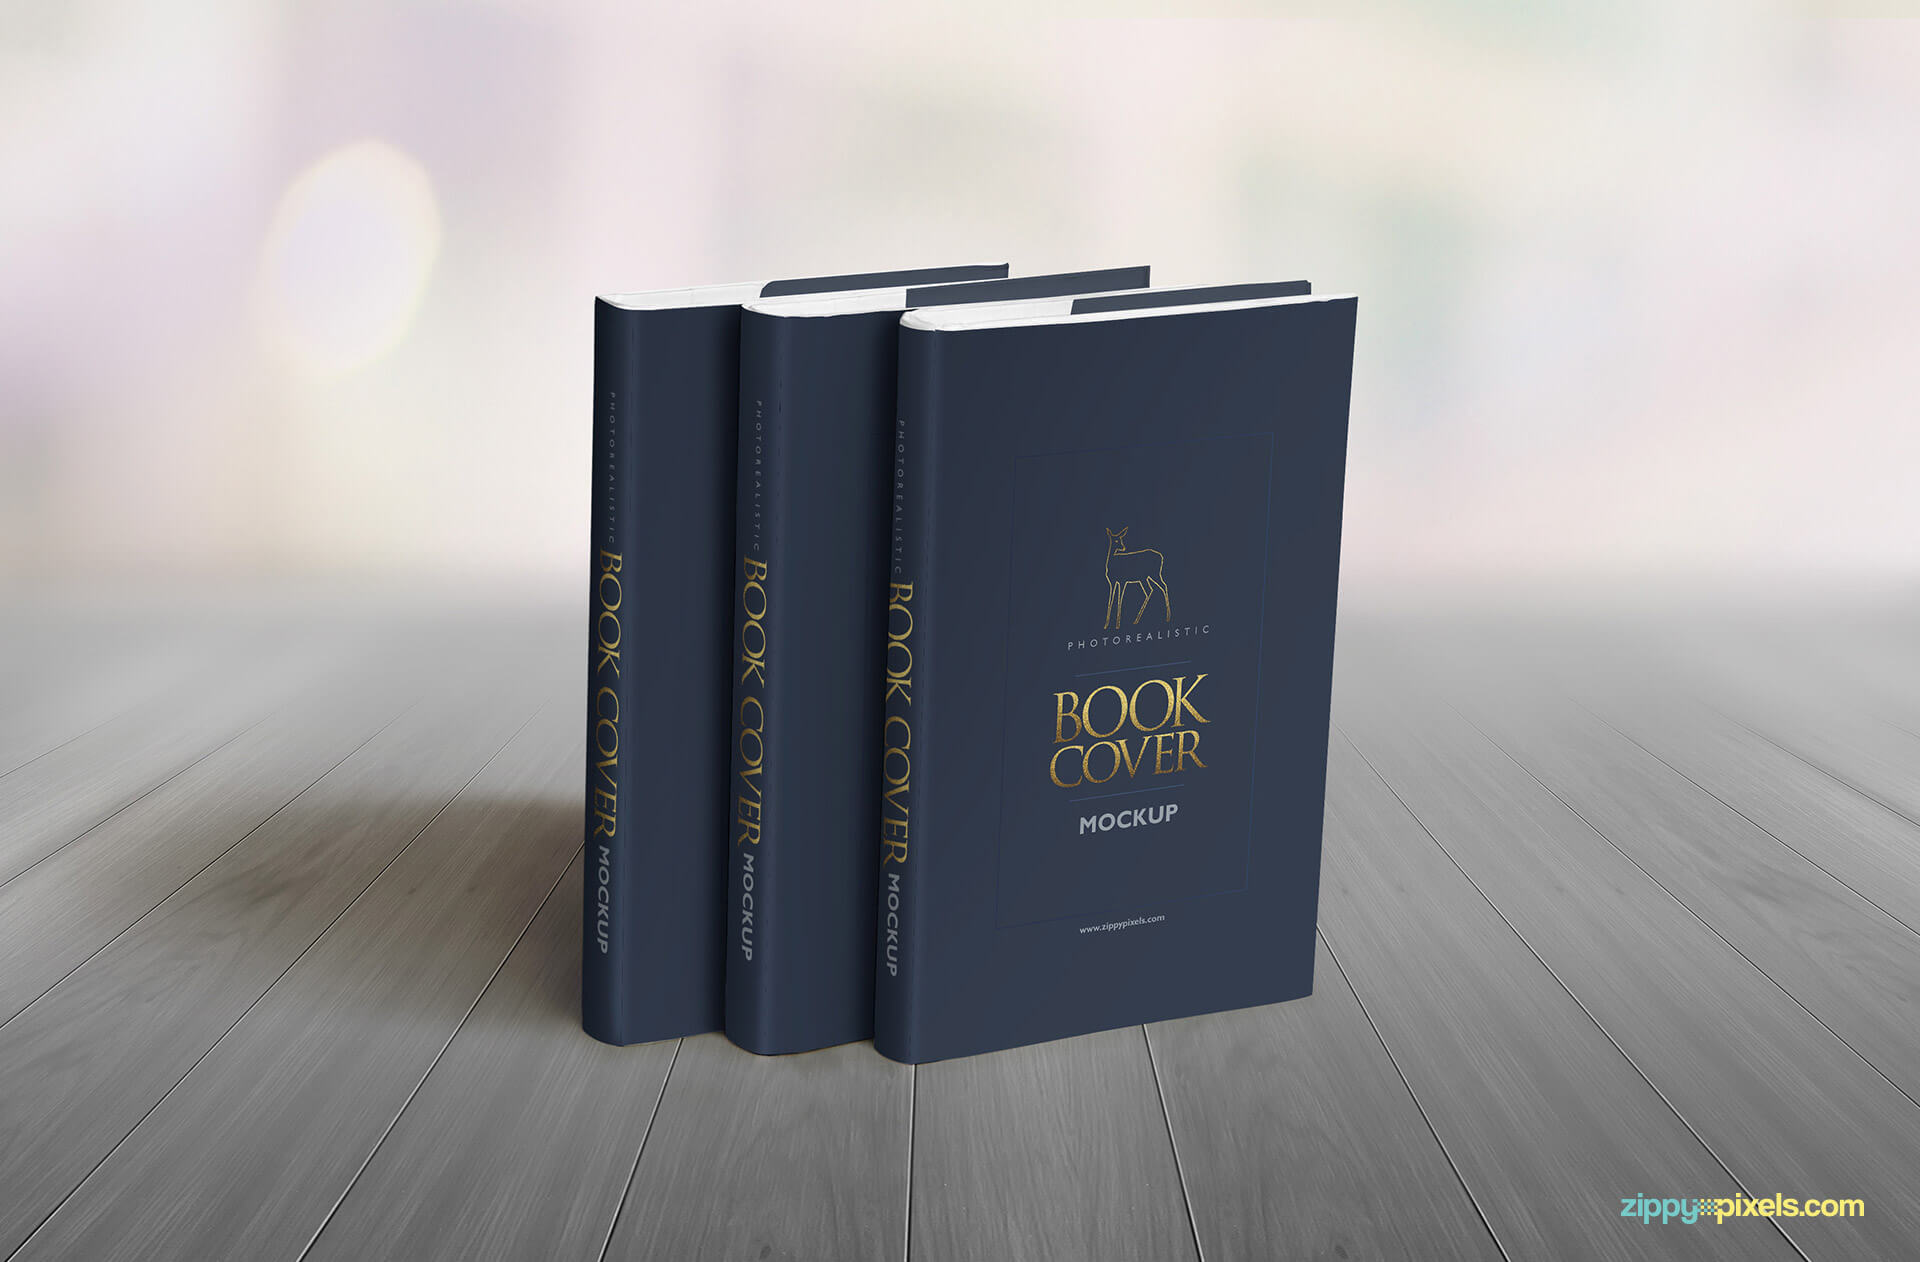 Mockup showing a fron view of set of 3 hardcover books standing vertically